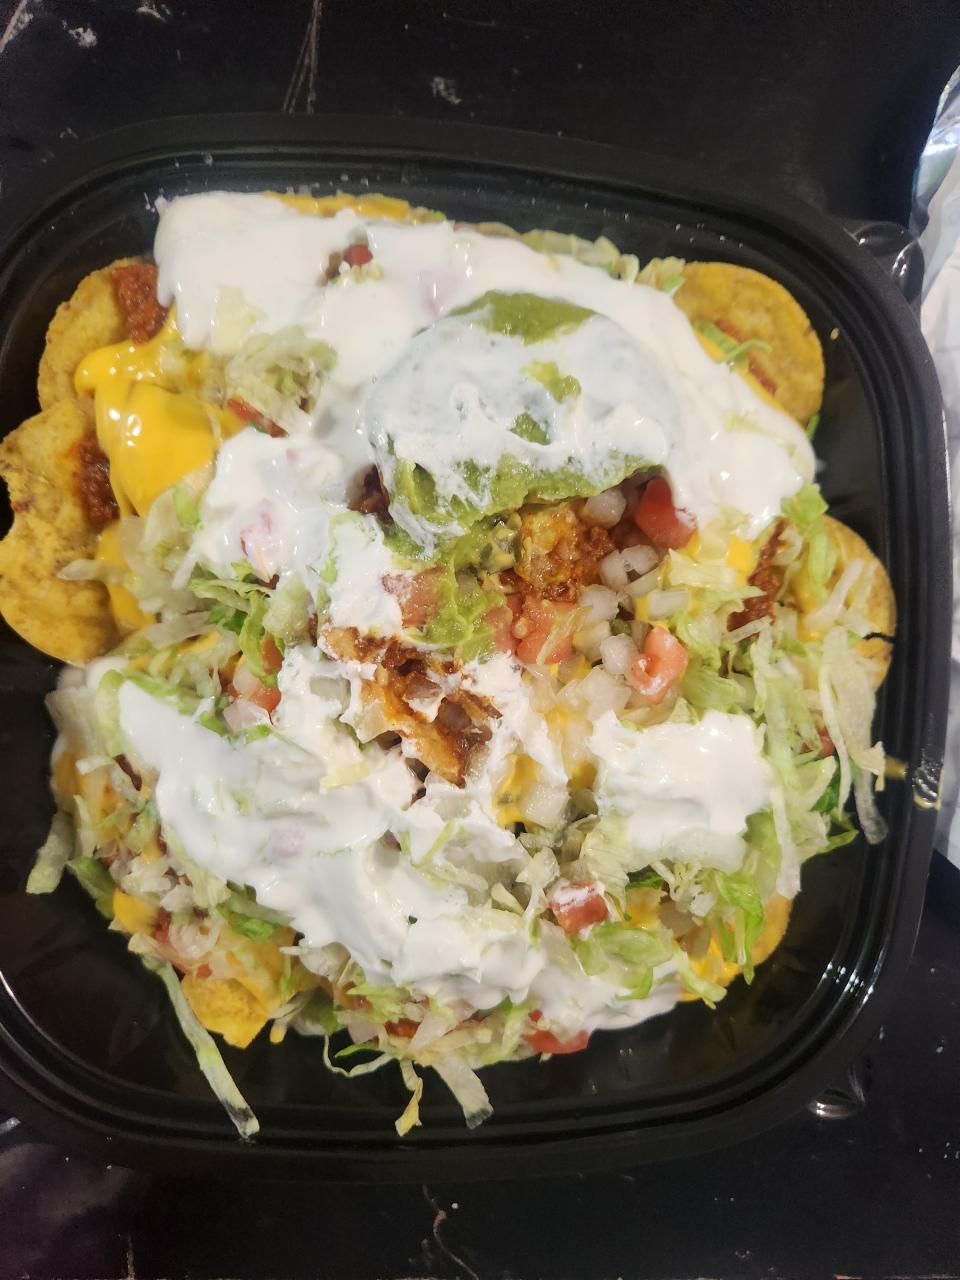 The Nachos Grande is always a solid pick on the Sheetz menu.